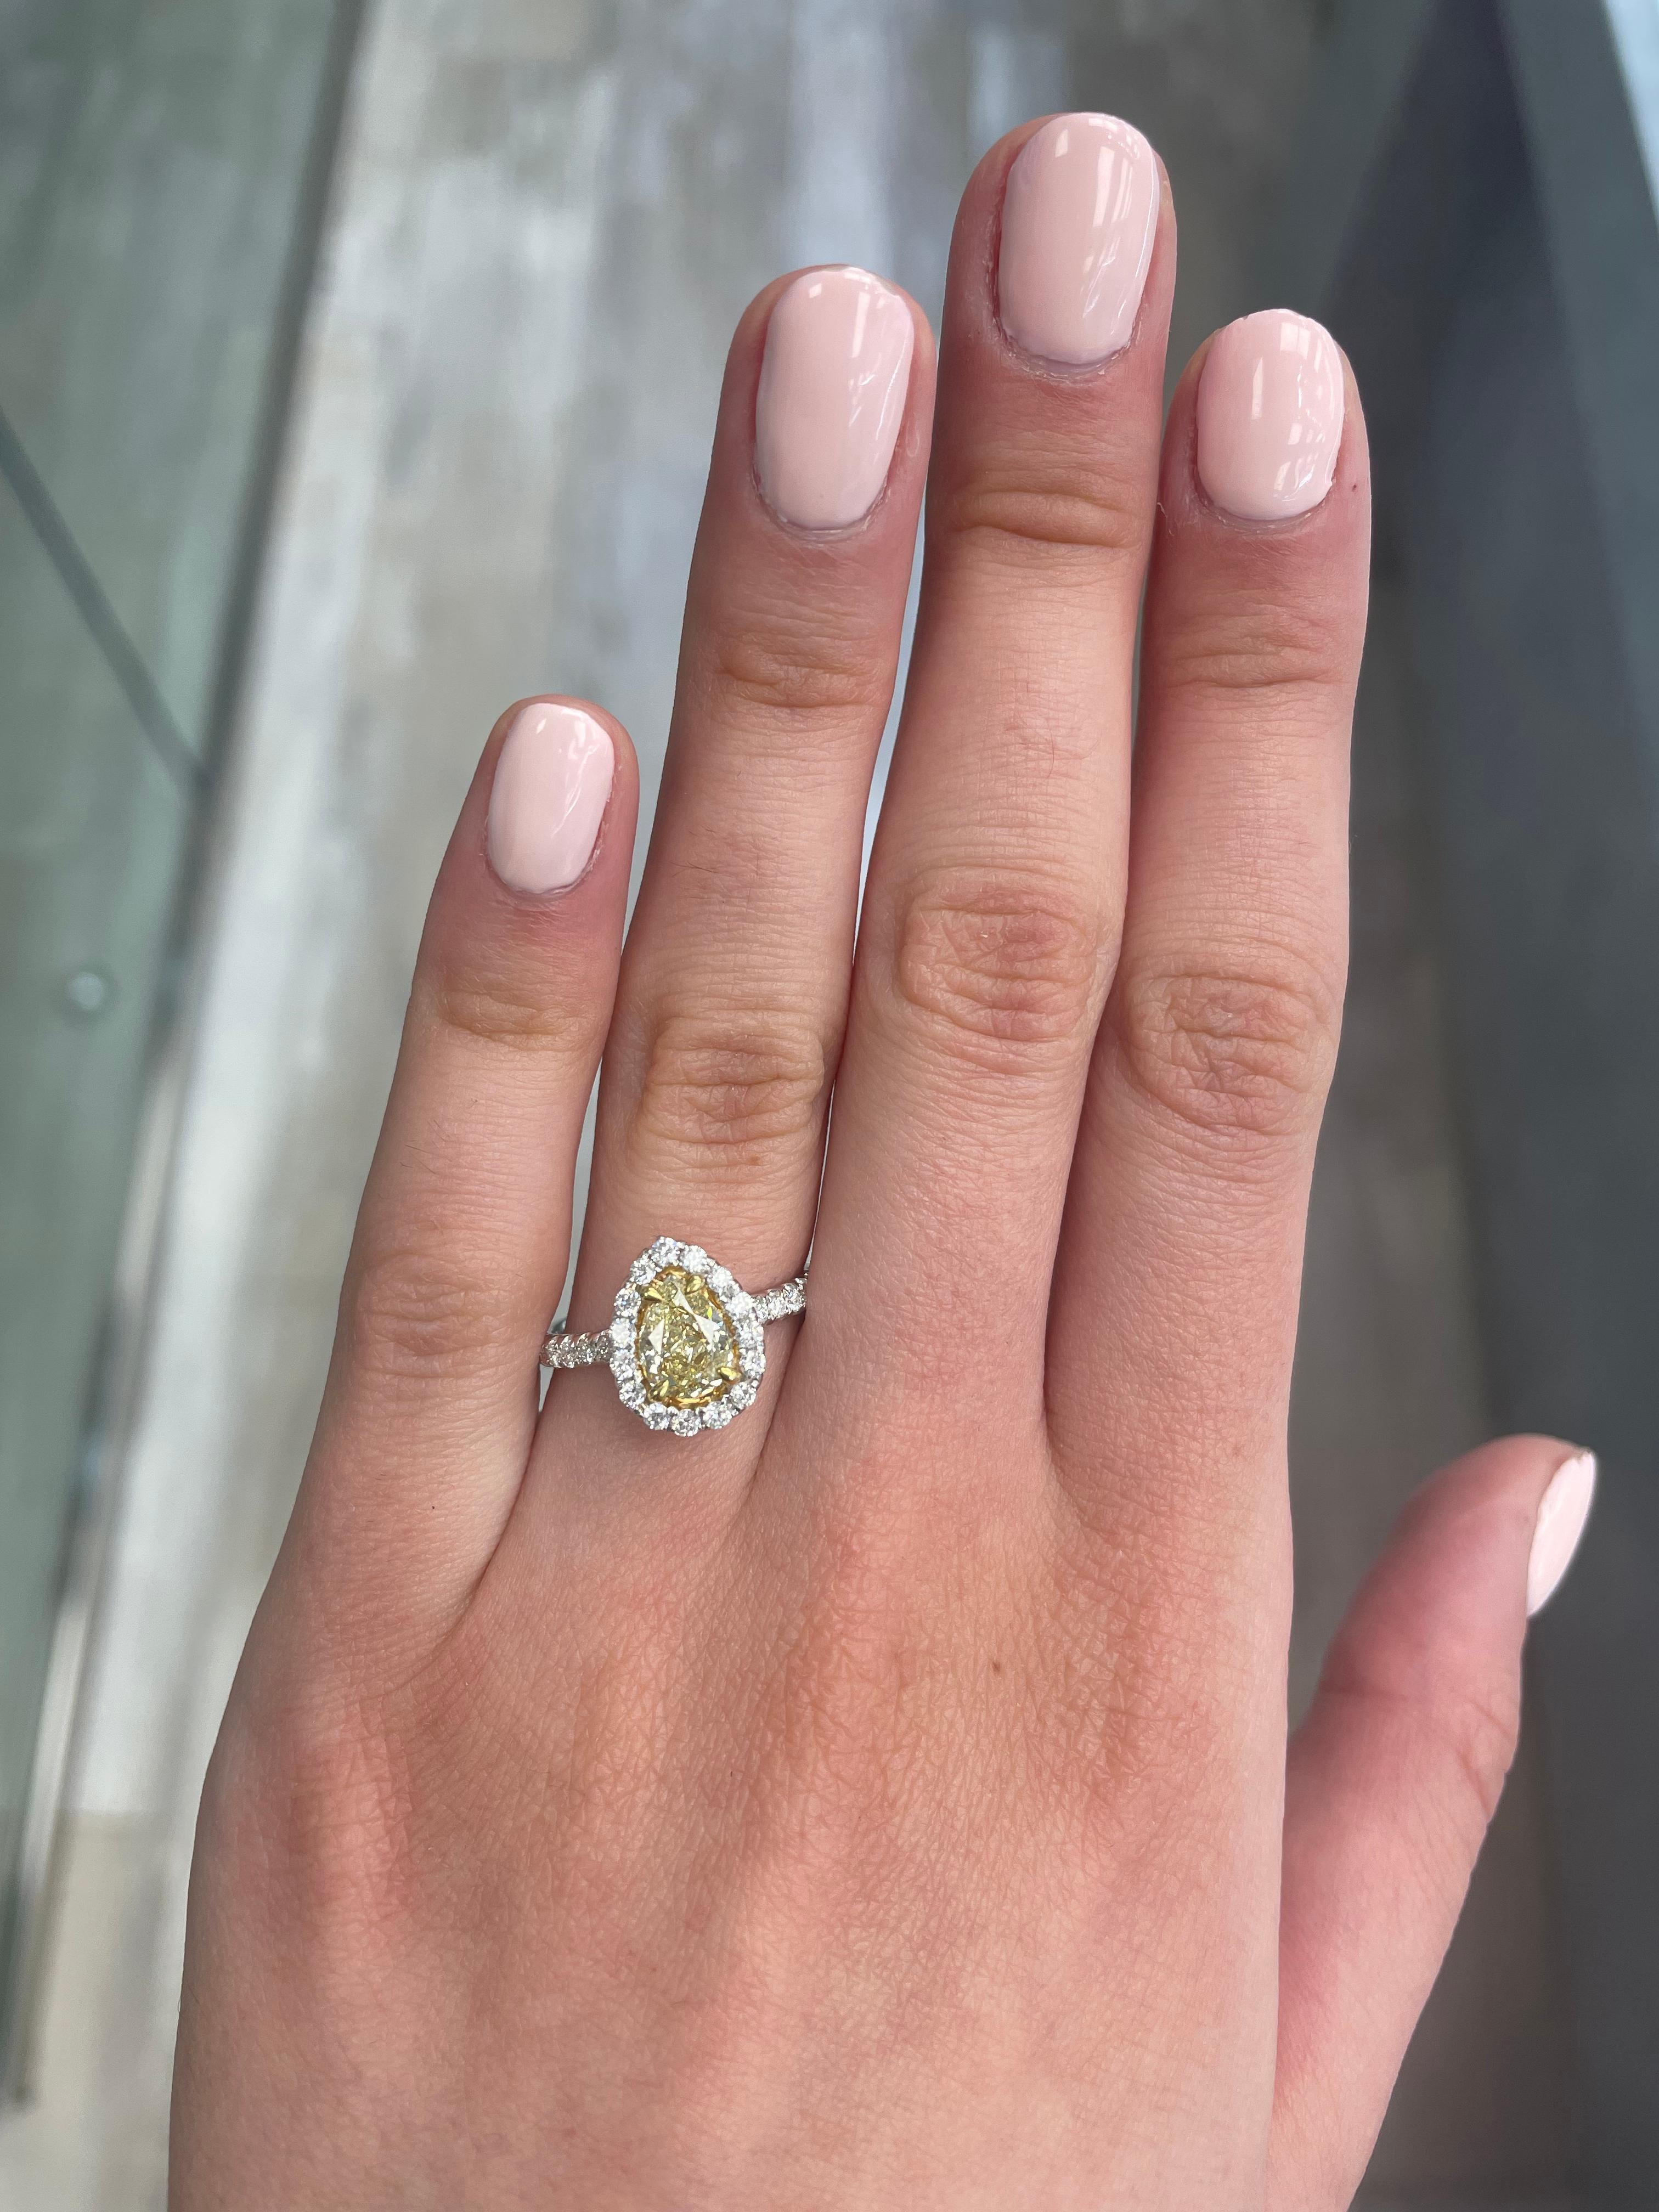 Stunning modern EGL certified yellow diamond with halo ring, two-tone 18k yellow and white gold. By Alexander Beverly Hills
1.62 carats total diamond weight.
1.08 carat pear cut Fancy Intense Yellow color and SI2 clarity diamond, EGL graded.